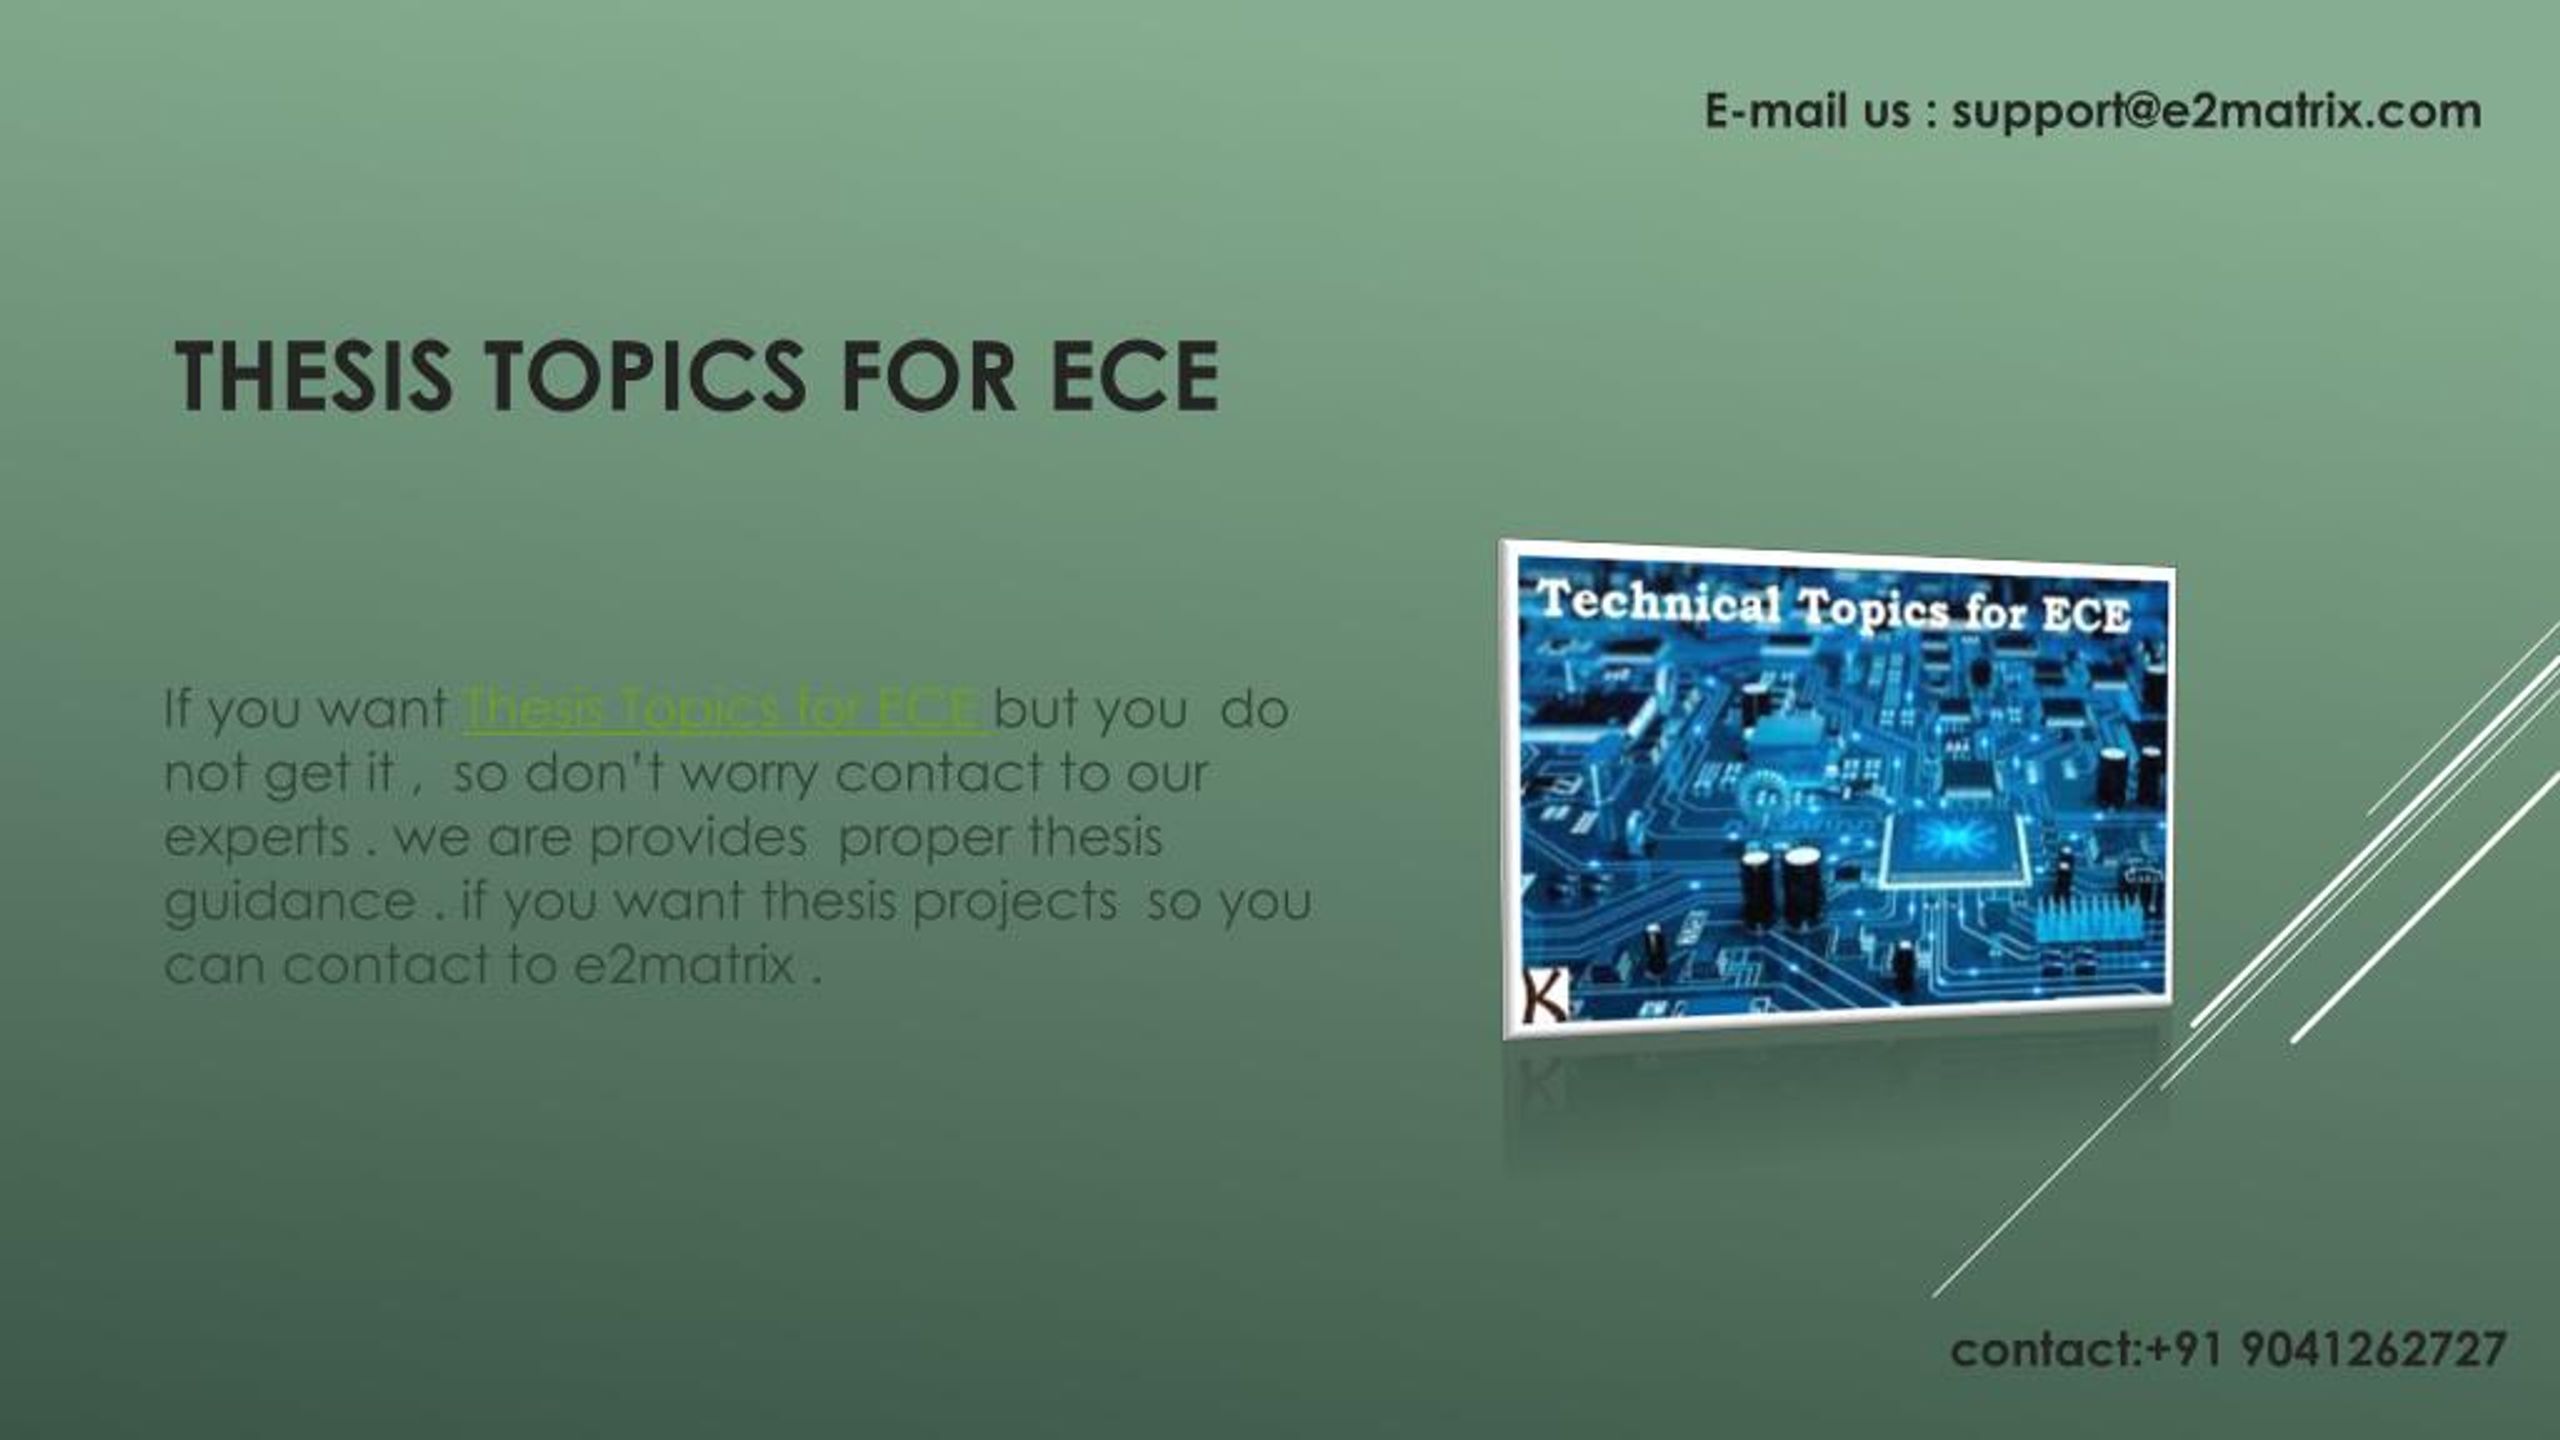 ece related topics for paper presentation